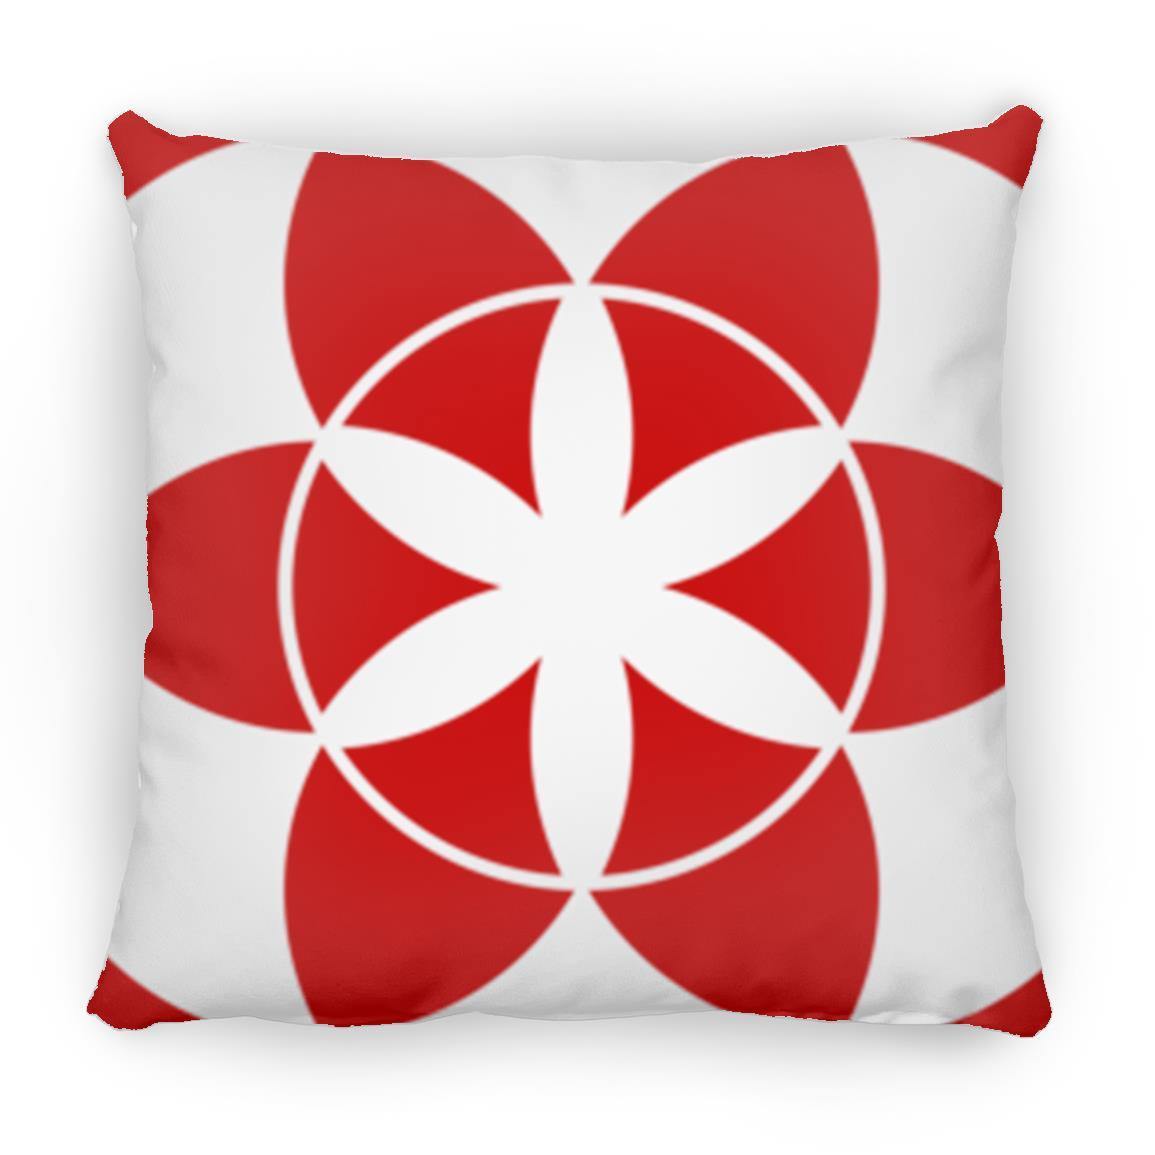 Crop Circle Pillow - West Knoyle - Shapes of Wisdom